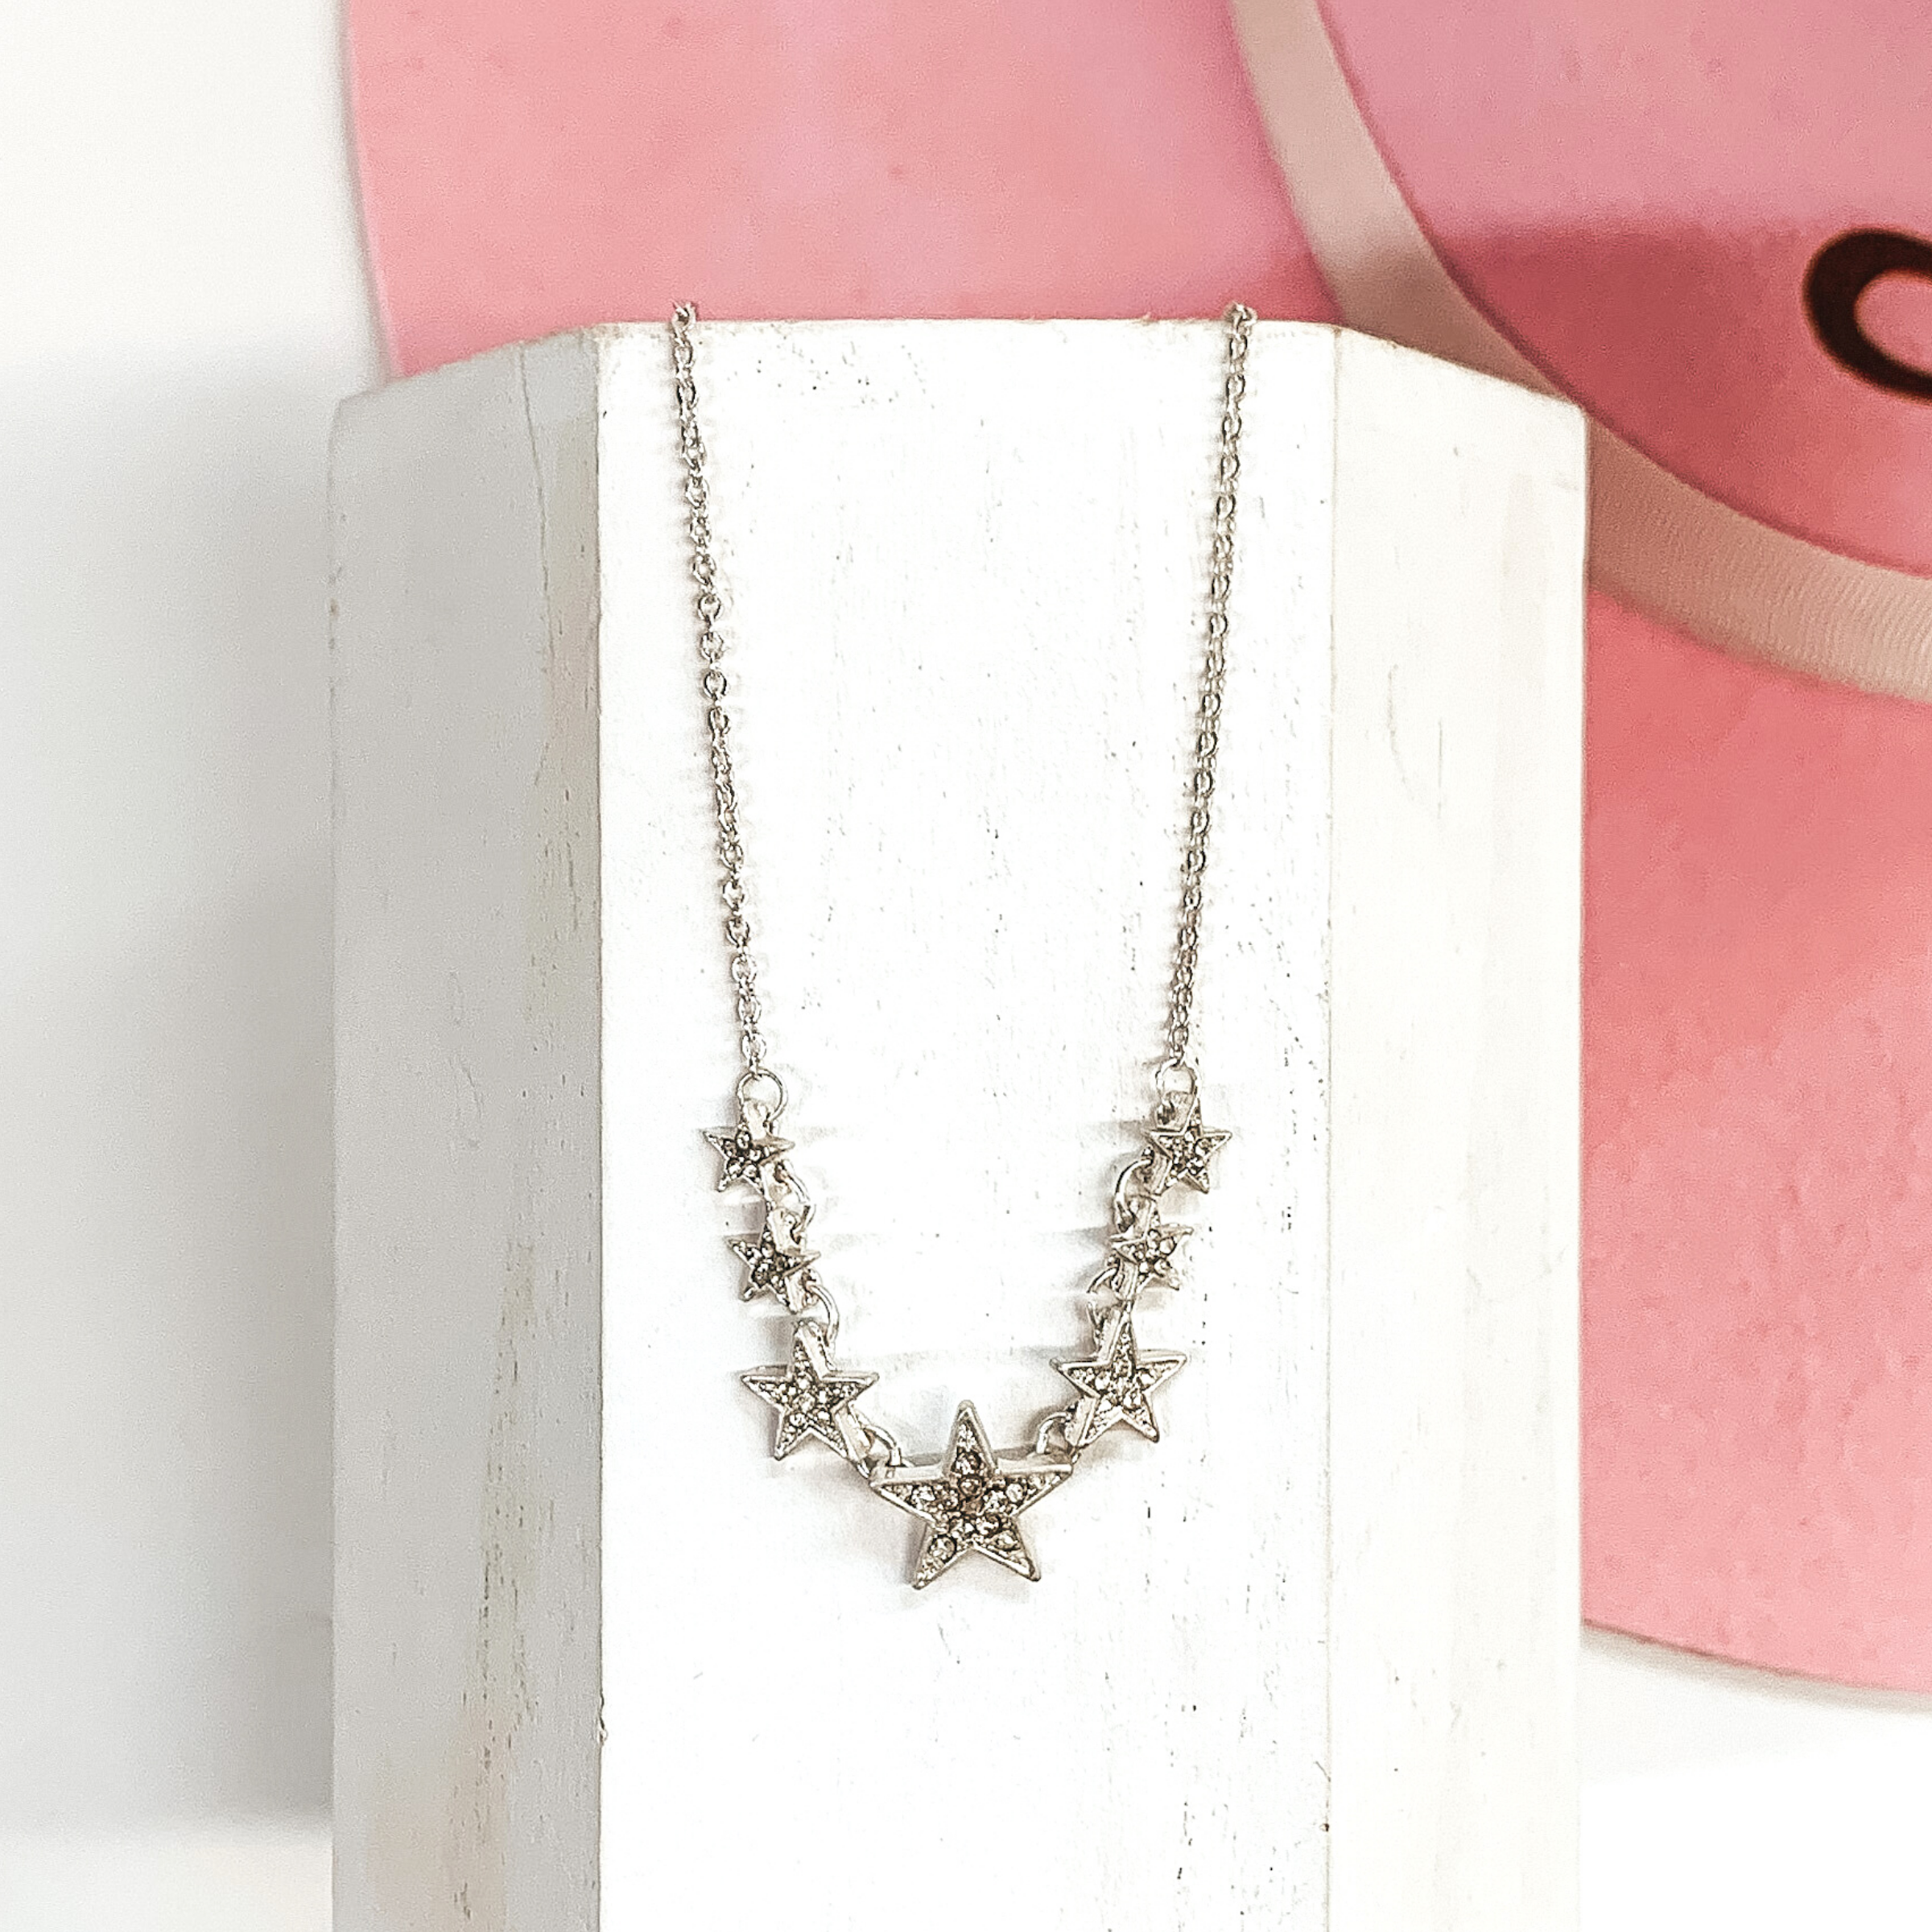 Simple Chain Necklace and Star Charms with Clear Crystals in Silver - Giddy Up Glamour Boutique